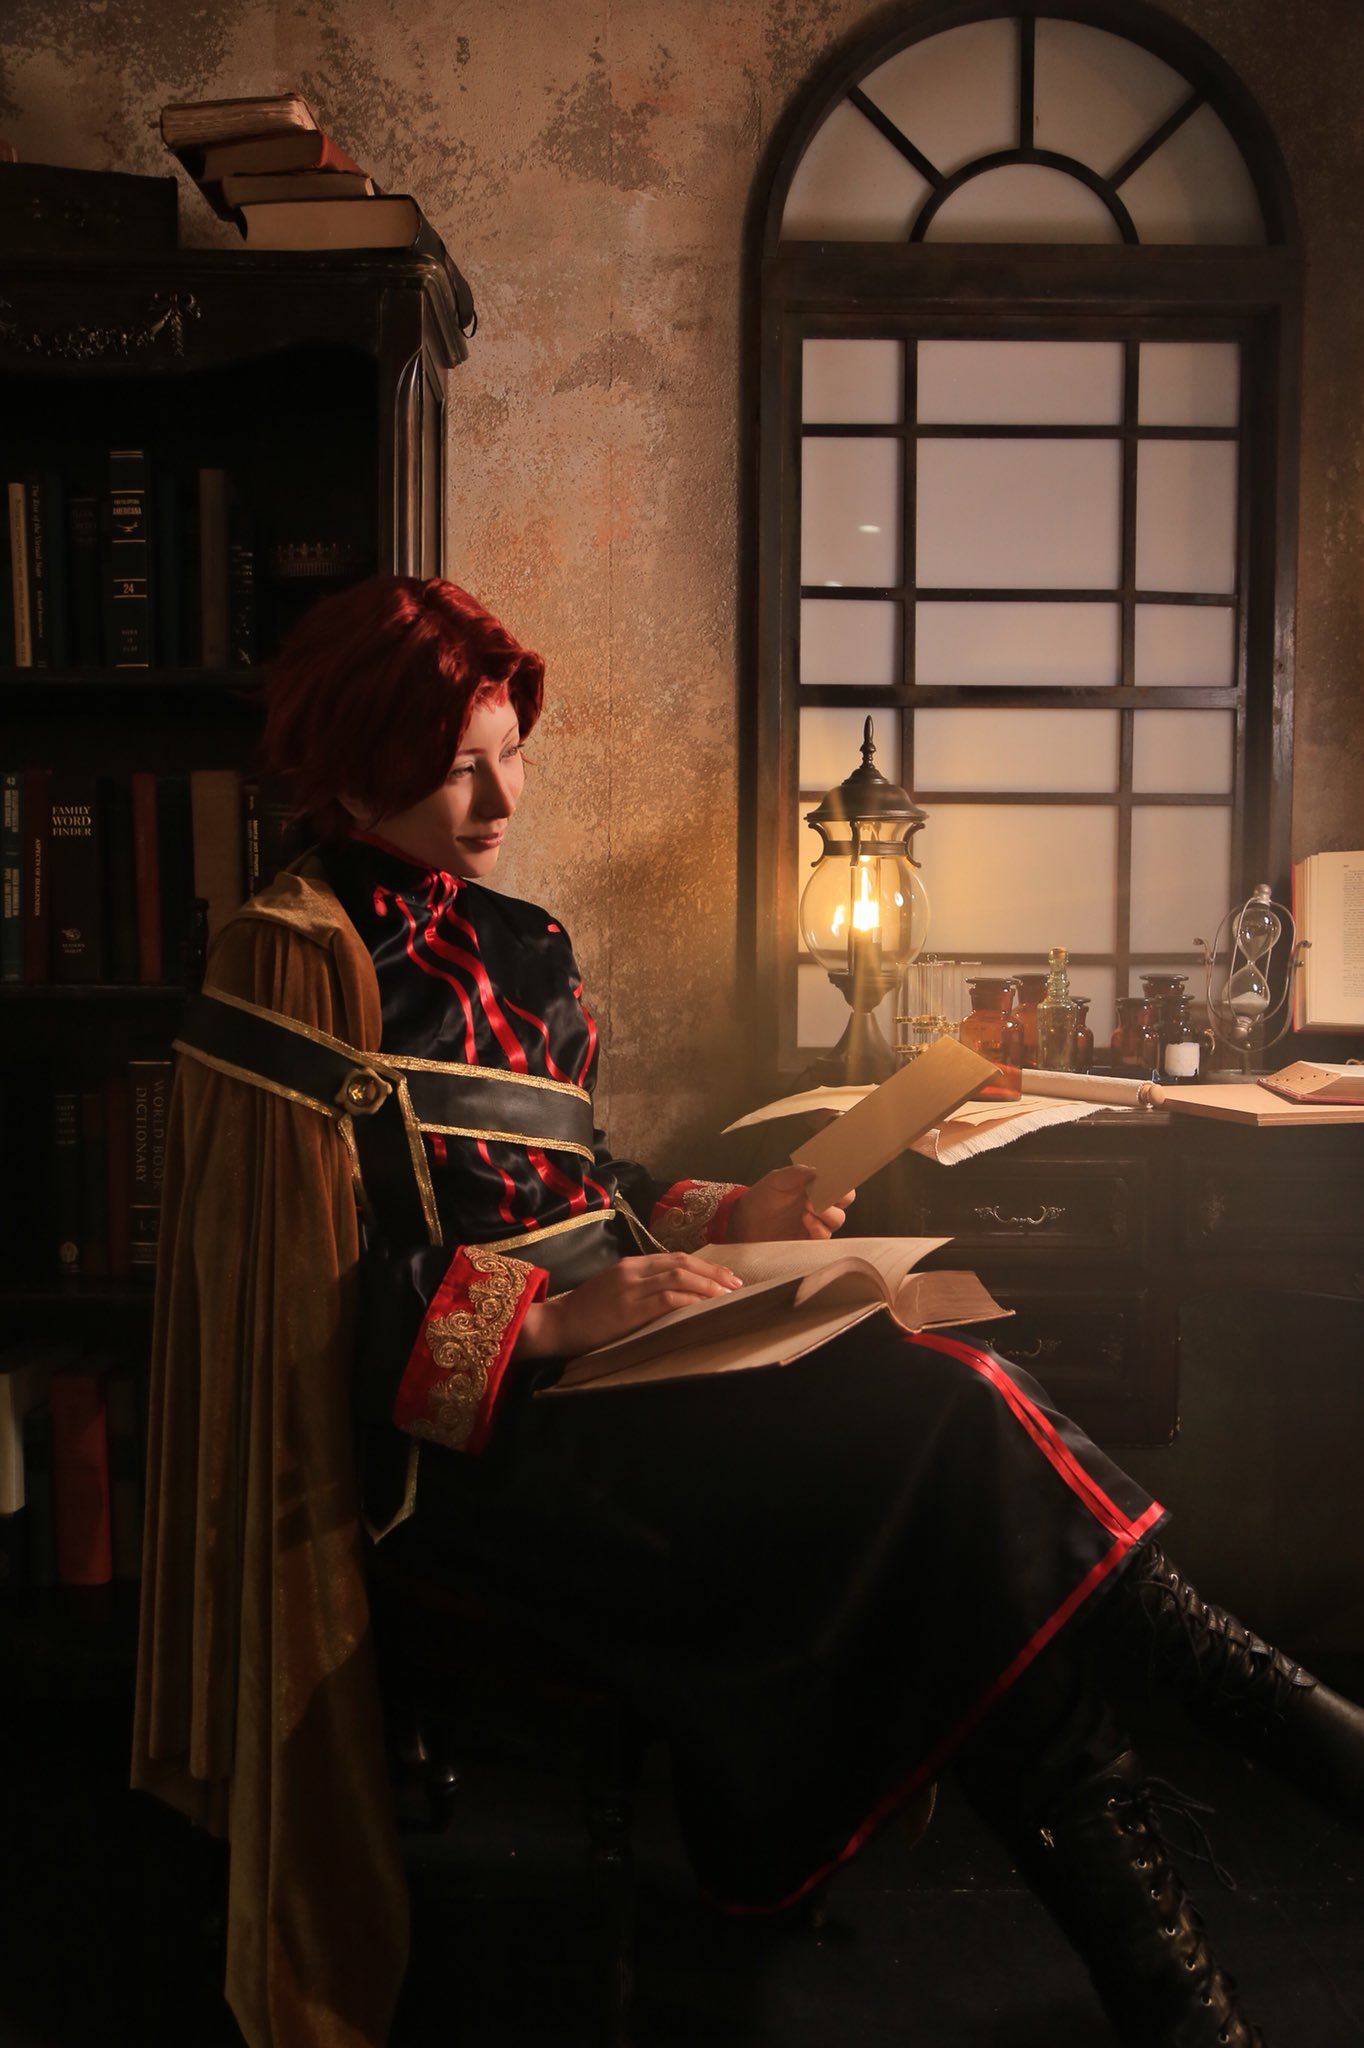 Hartmut cosplay sitting at the desk with moody light